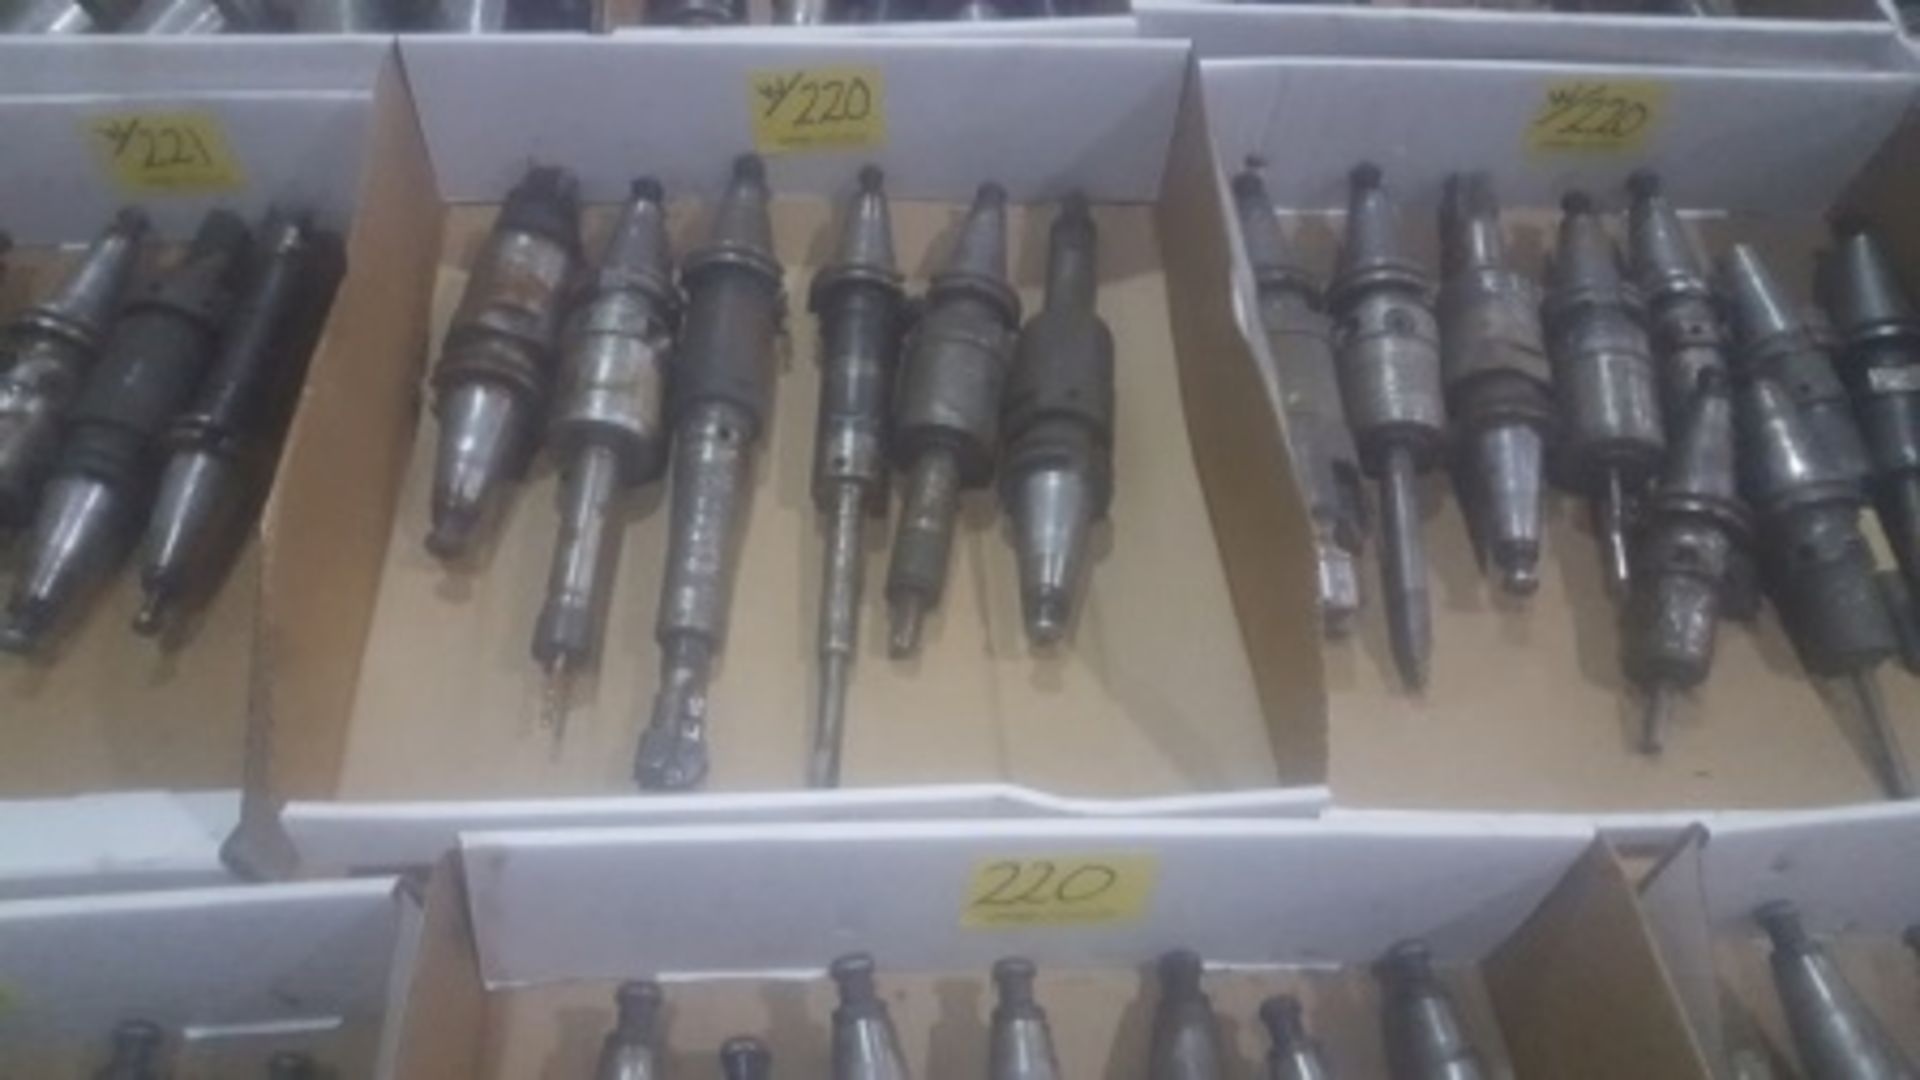 (3) Boxes with CNC tool holders, carbide cutters and high speed steel drills